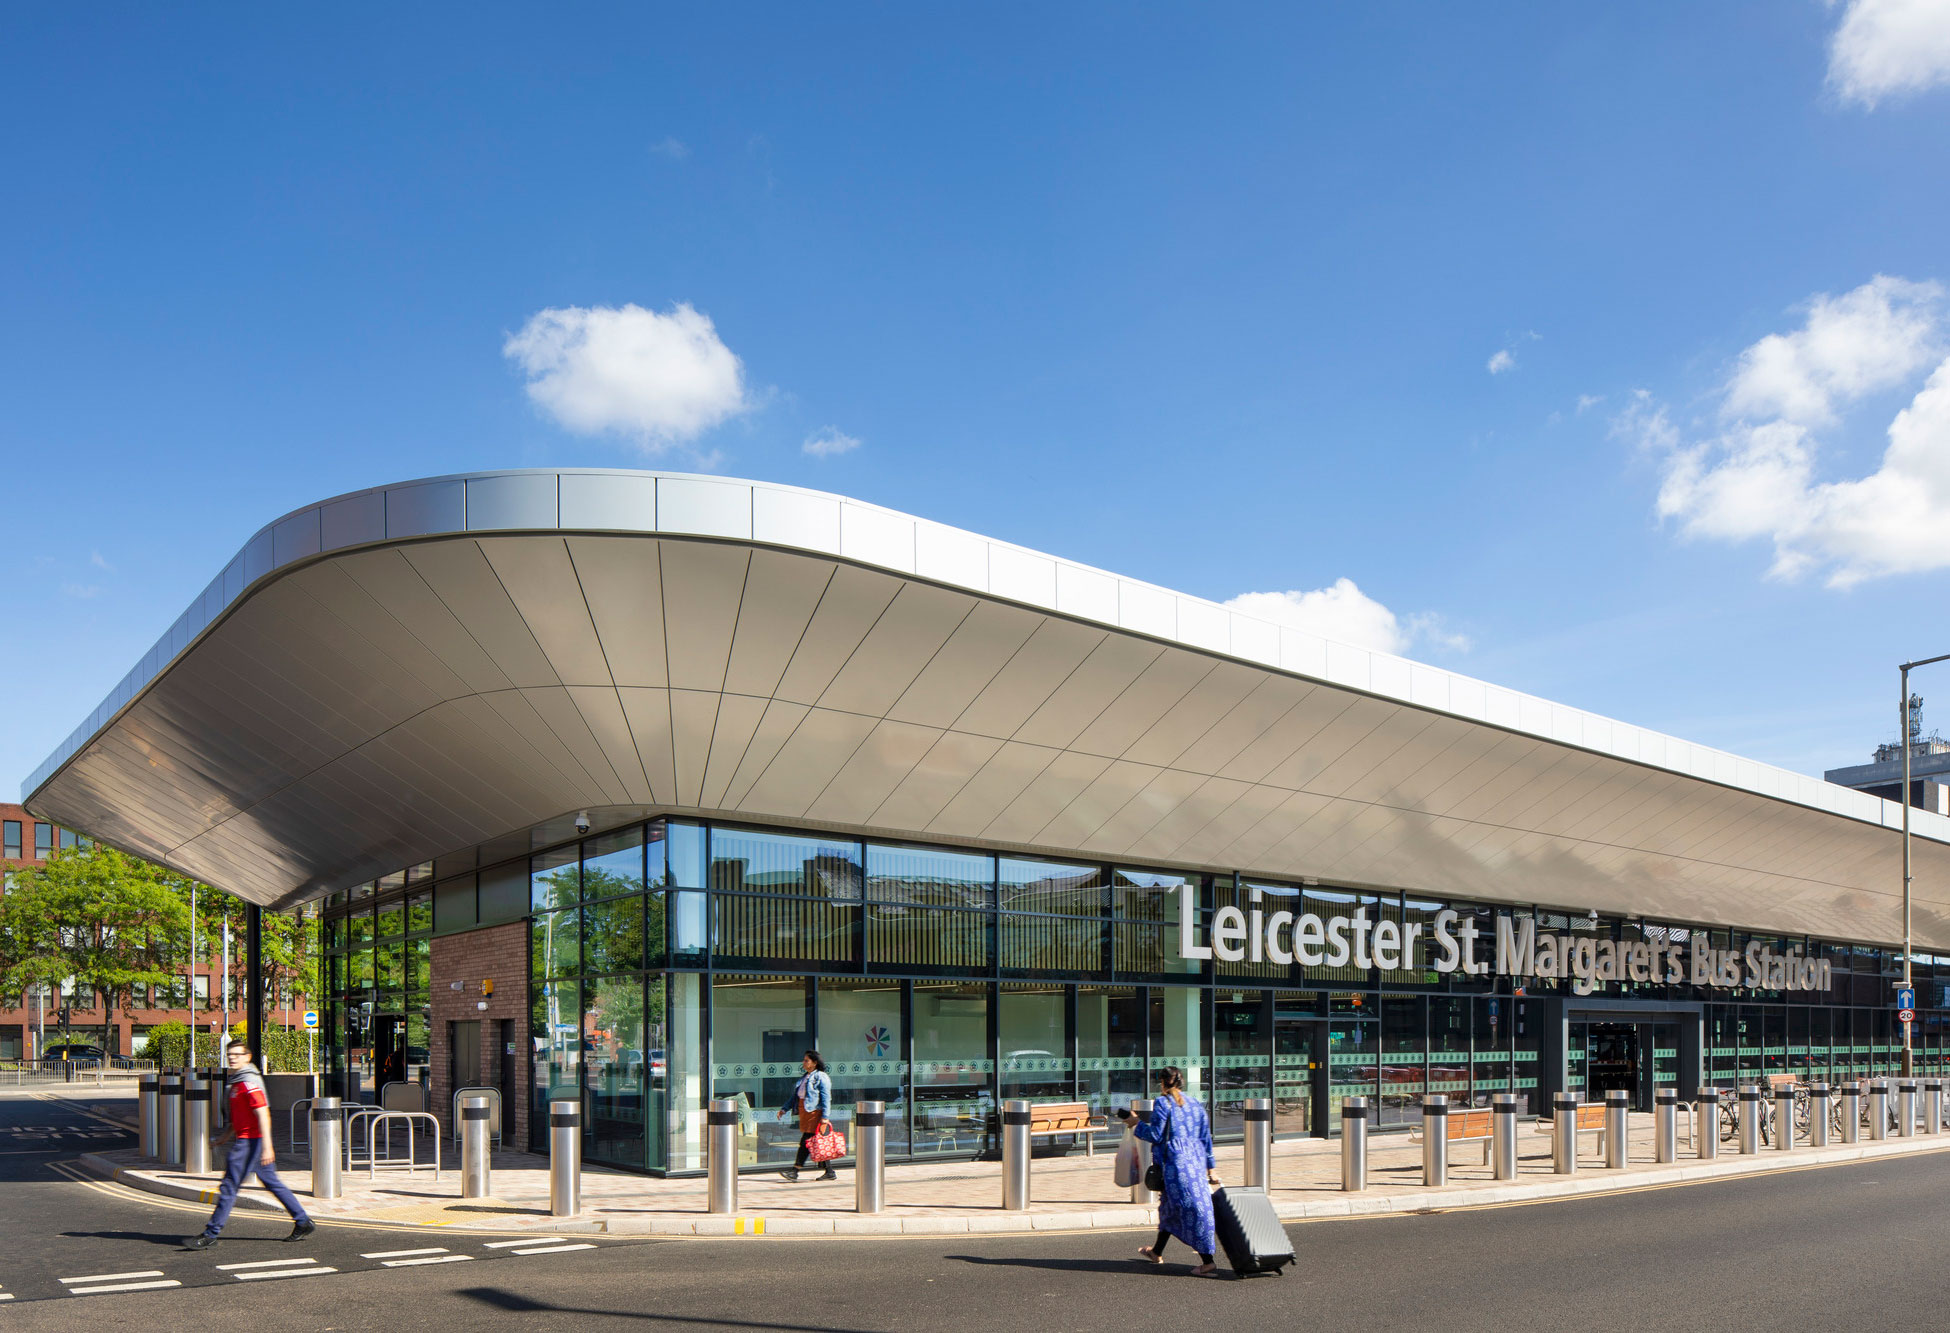 St. Margaret’s Bus Station named Regeneration Project of the Year